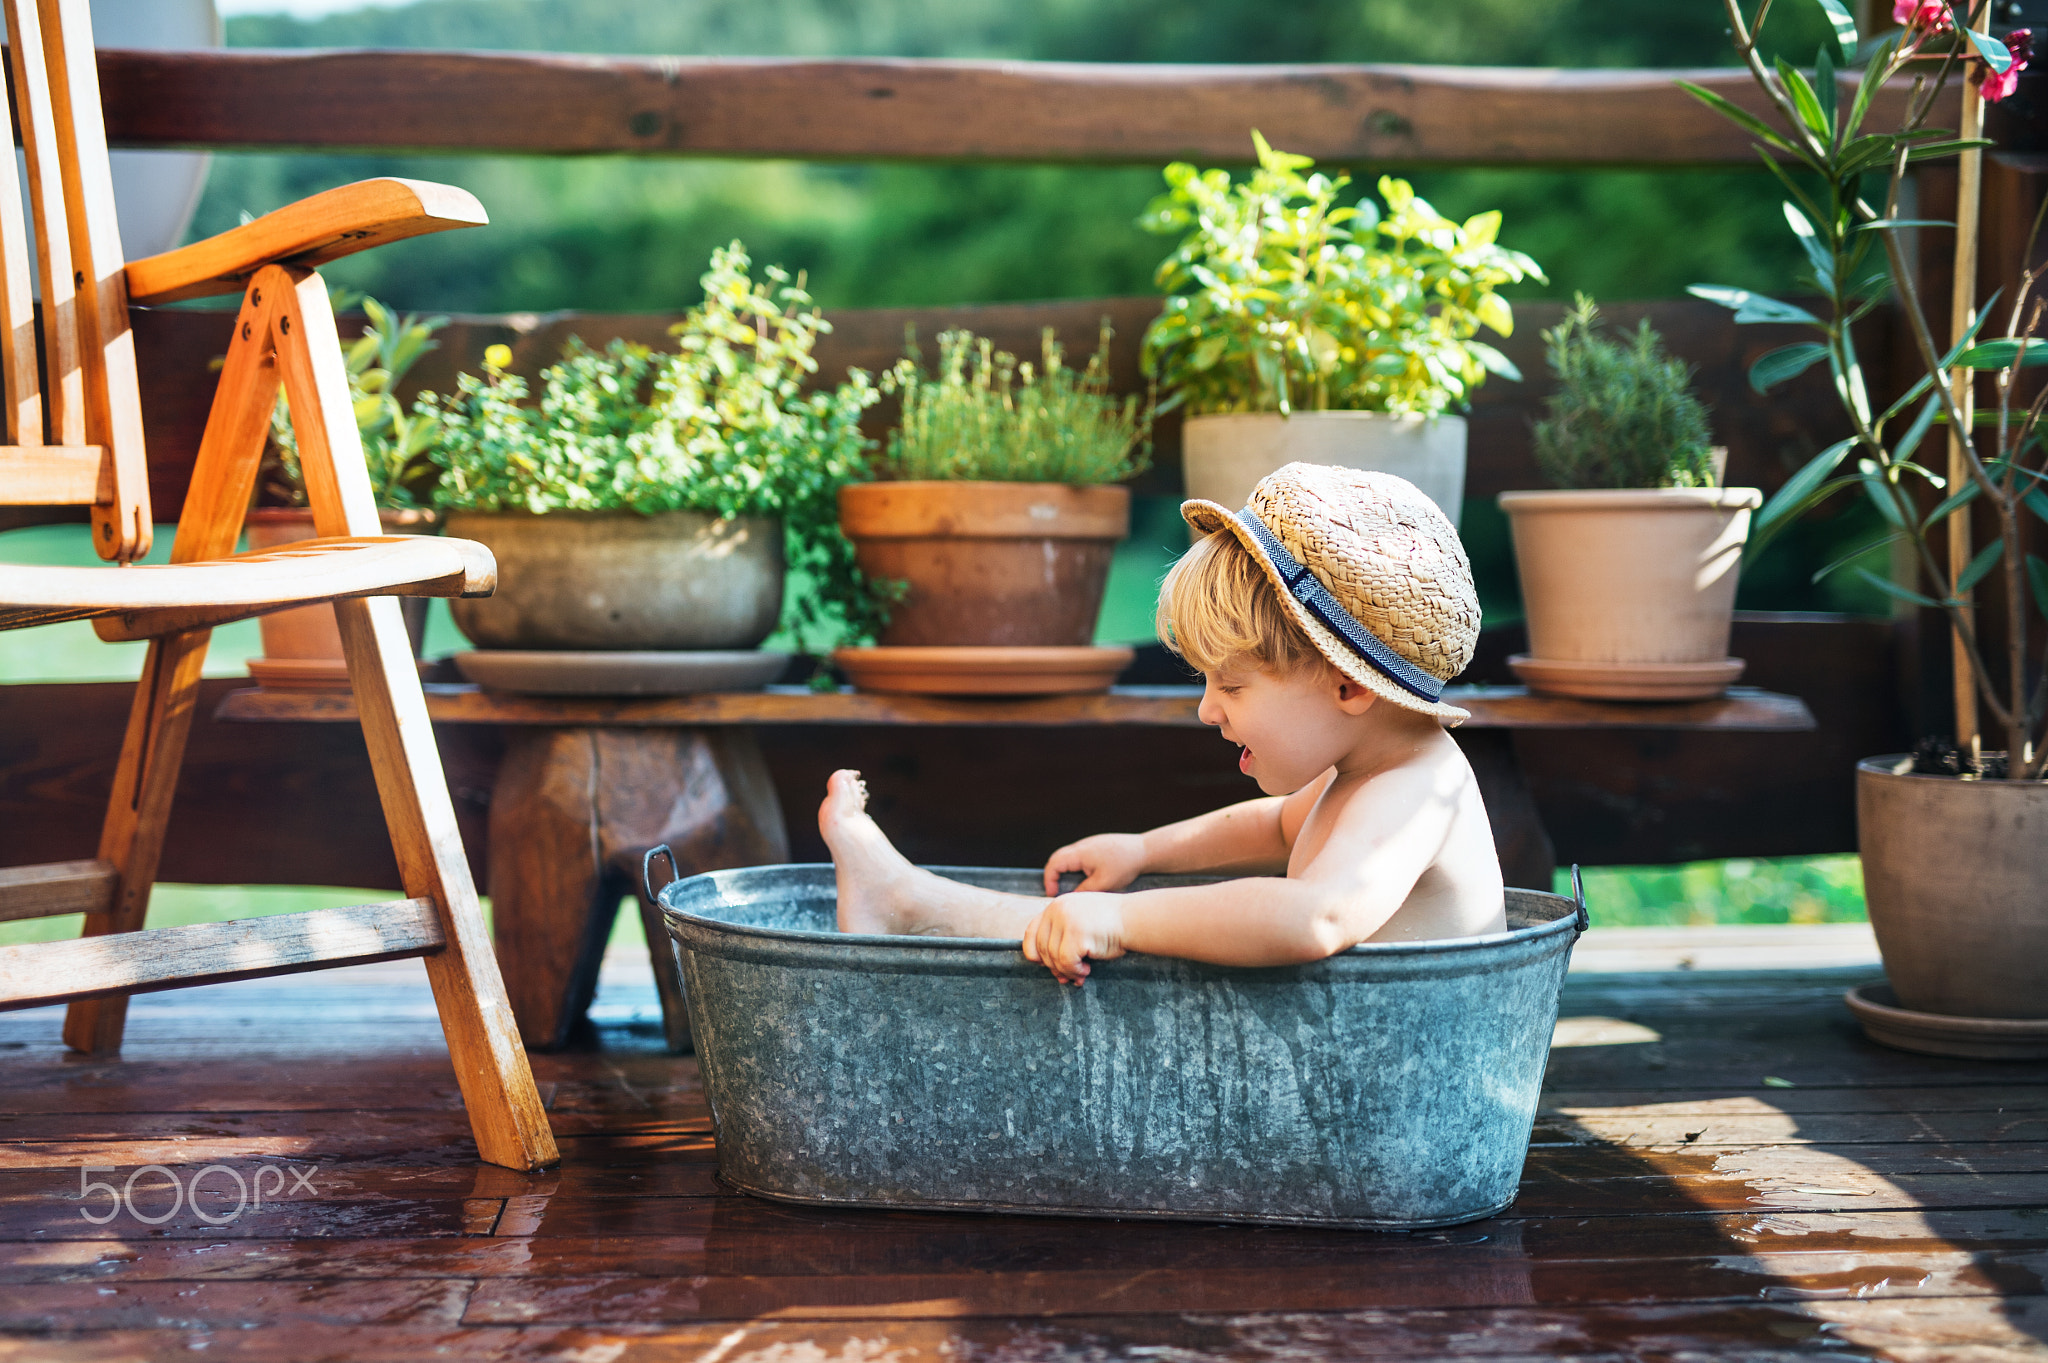 Small boy with a hat in bath outdoors in garden in summer, playing in water.